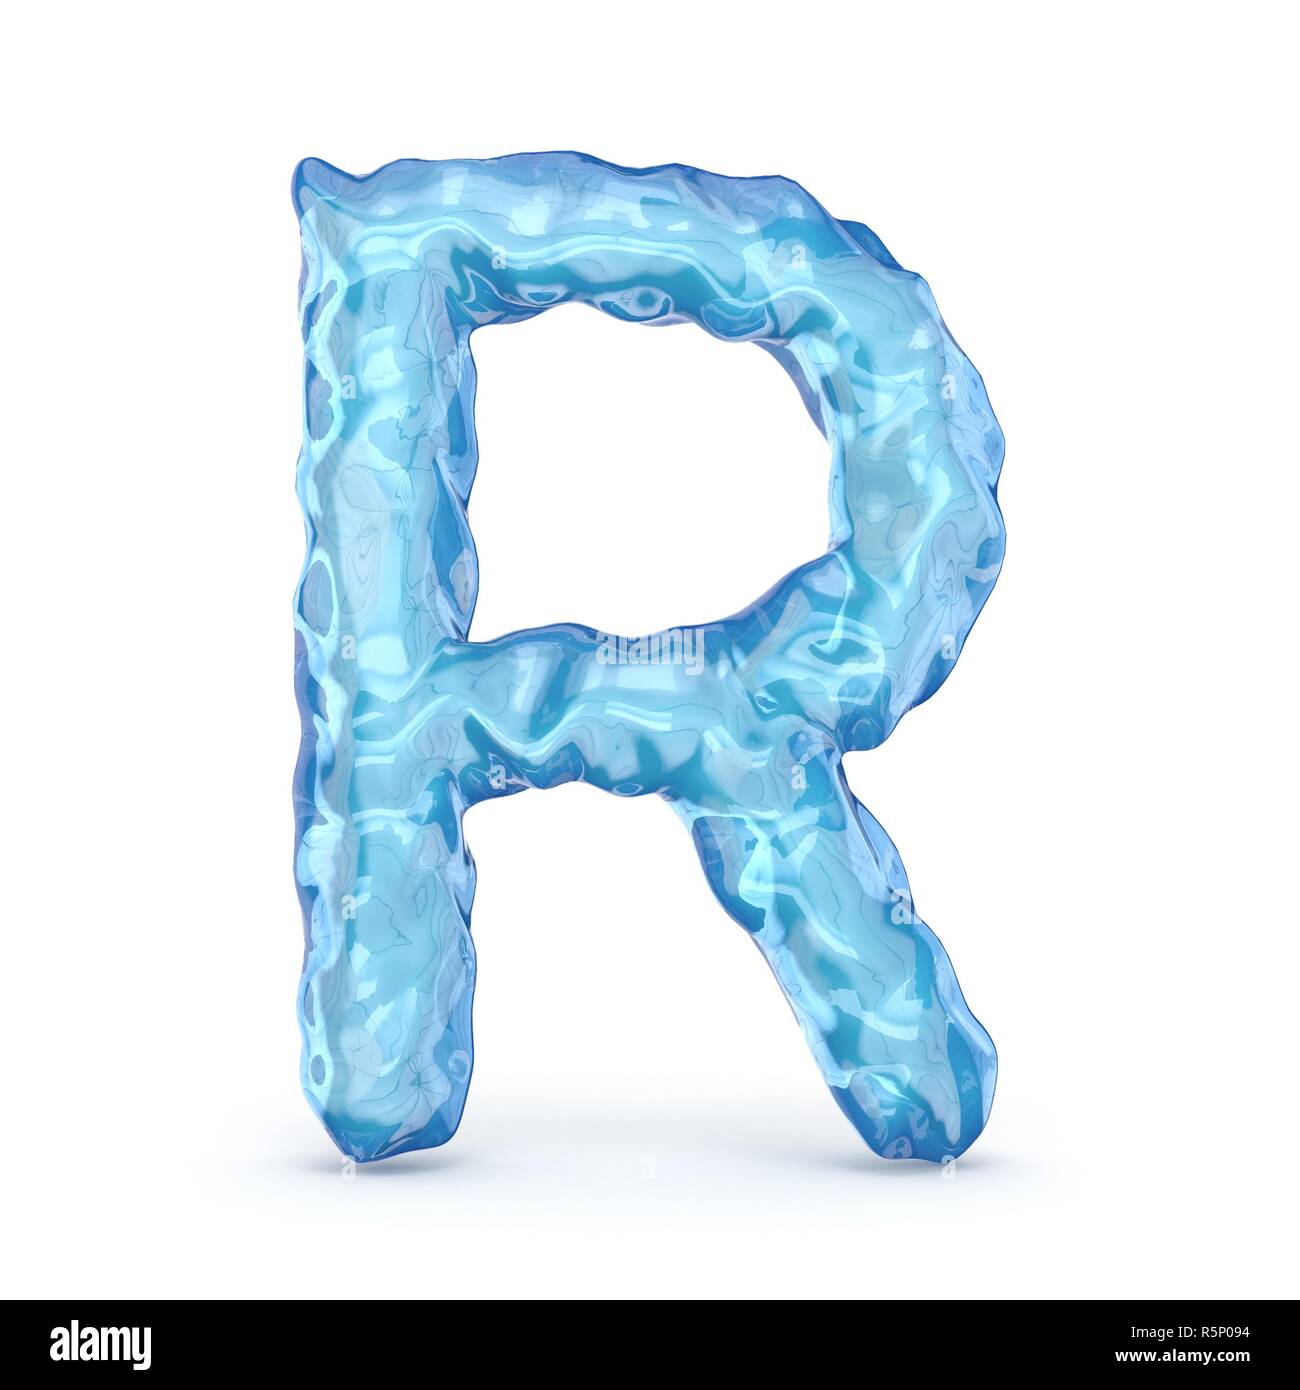 Ice font letter R 3D Stock Photo